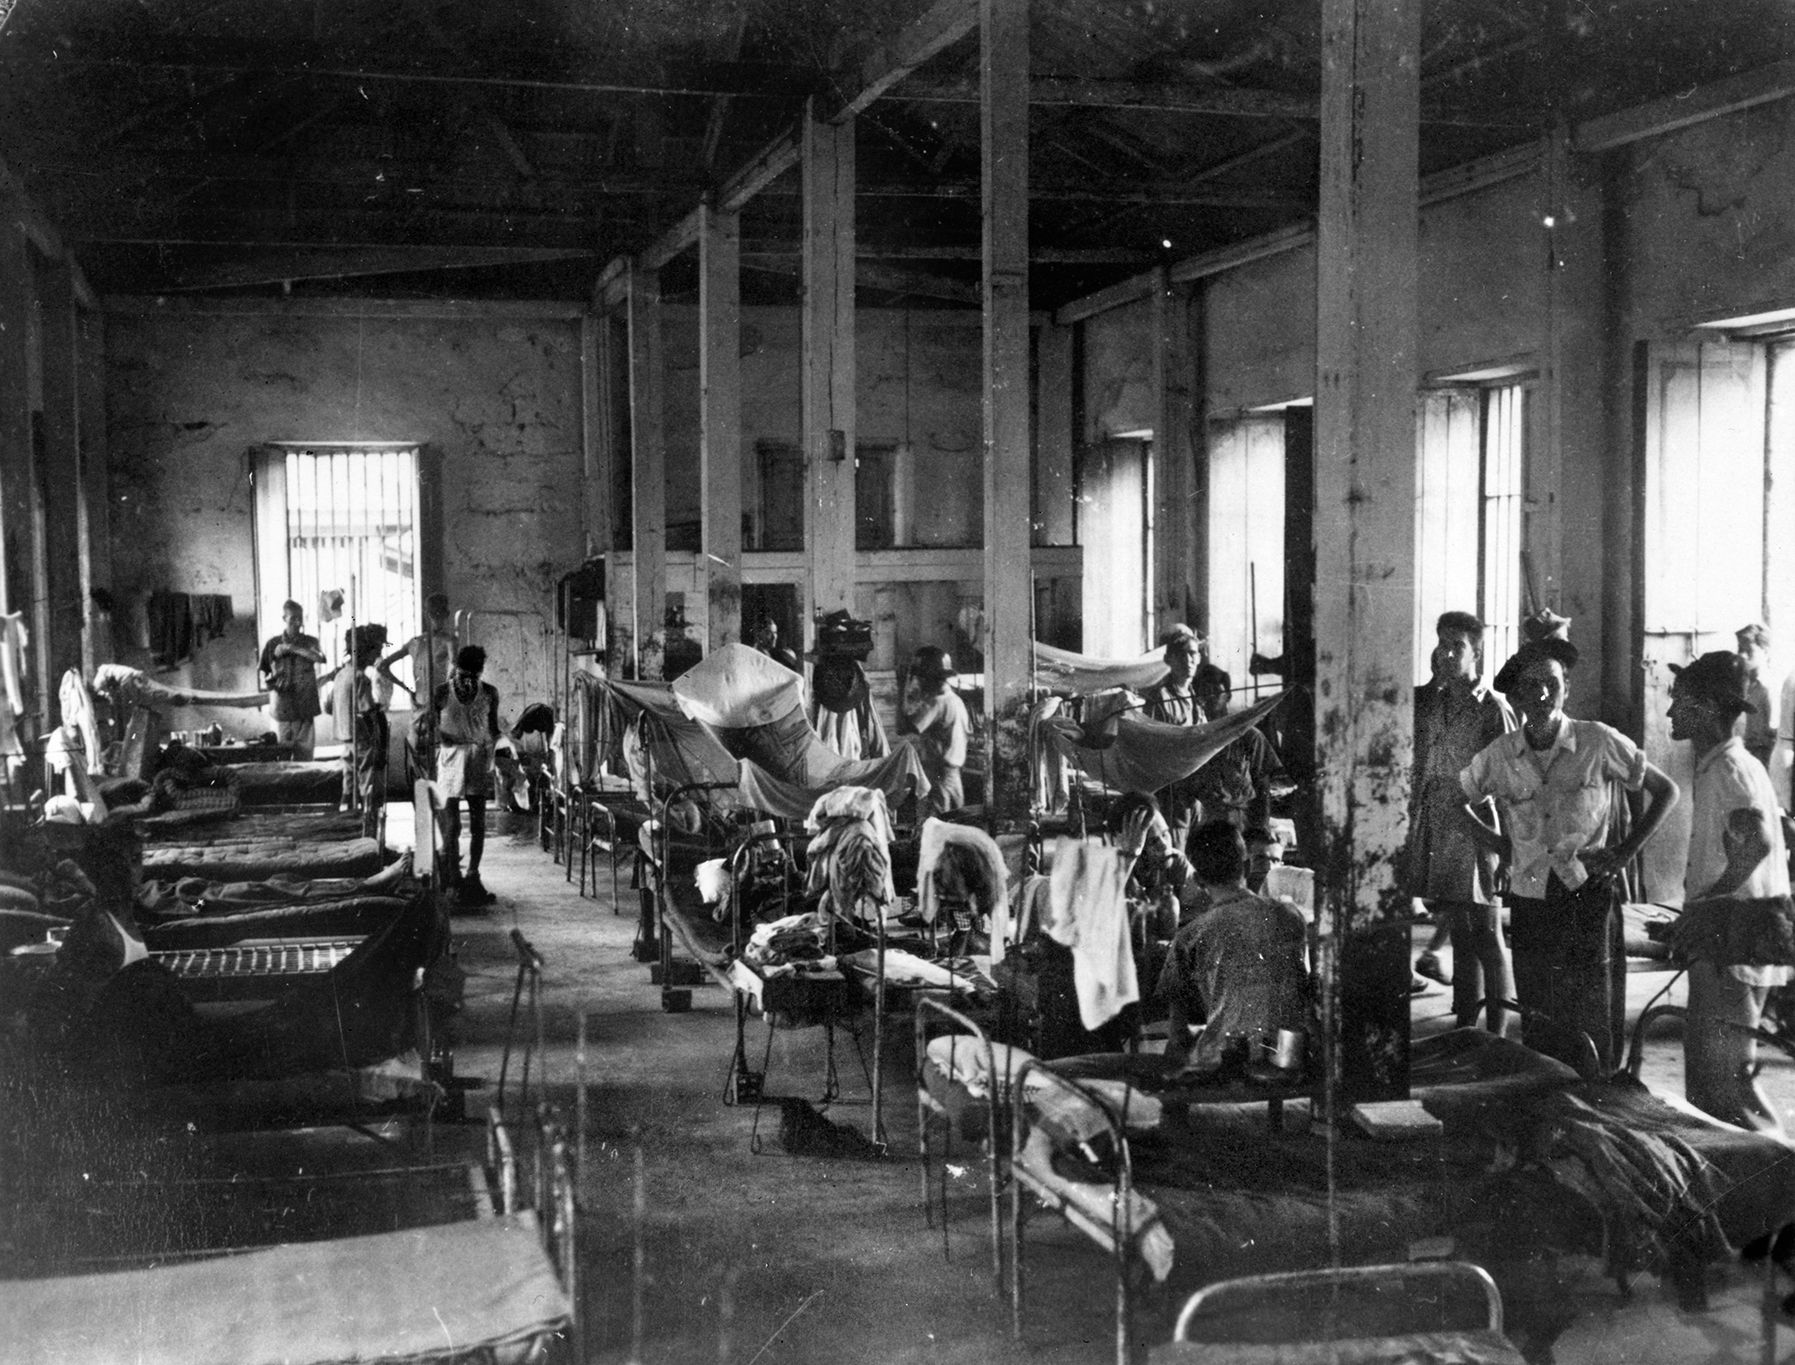 Patients in the hospital ward at Bilibid Prison in Manila. Joe was sent here after a beating for attacking a guard and saved himself by pretending to be insane.